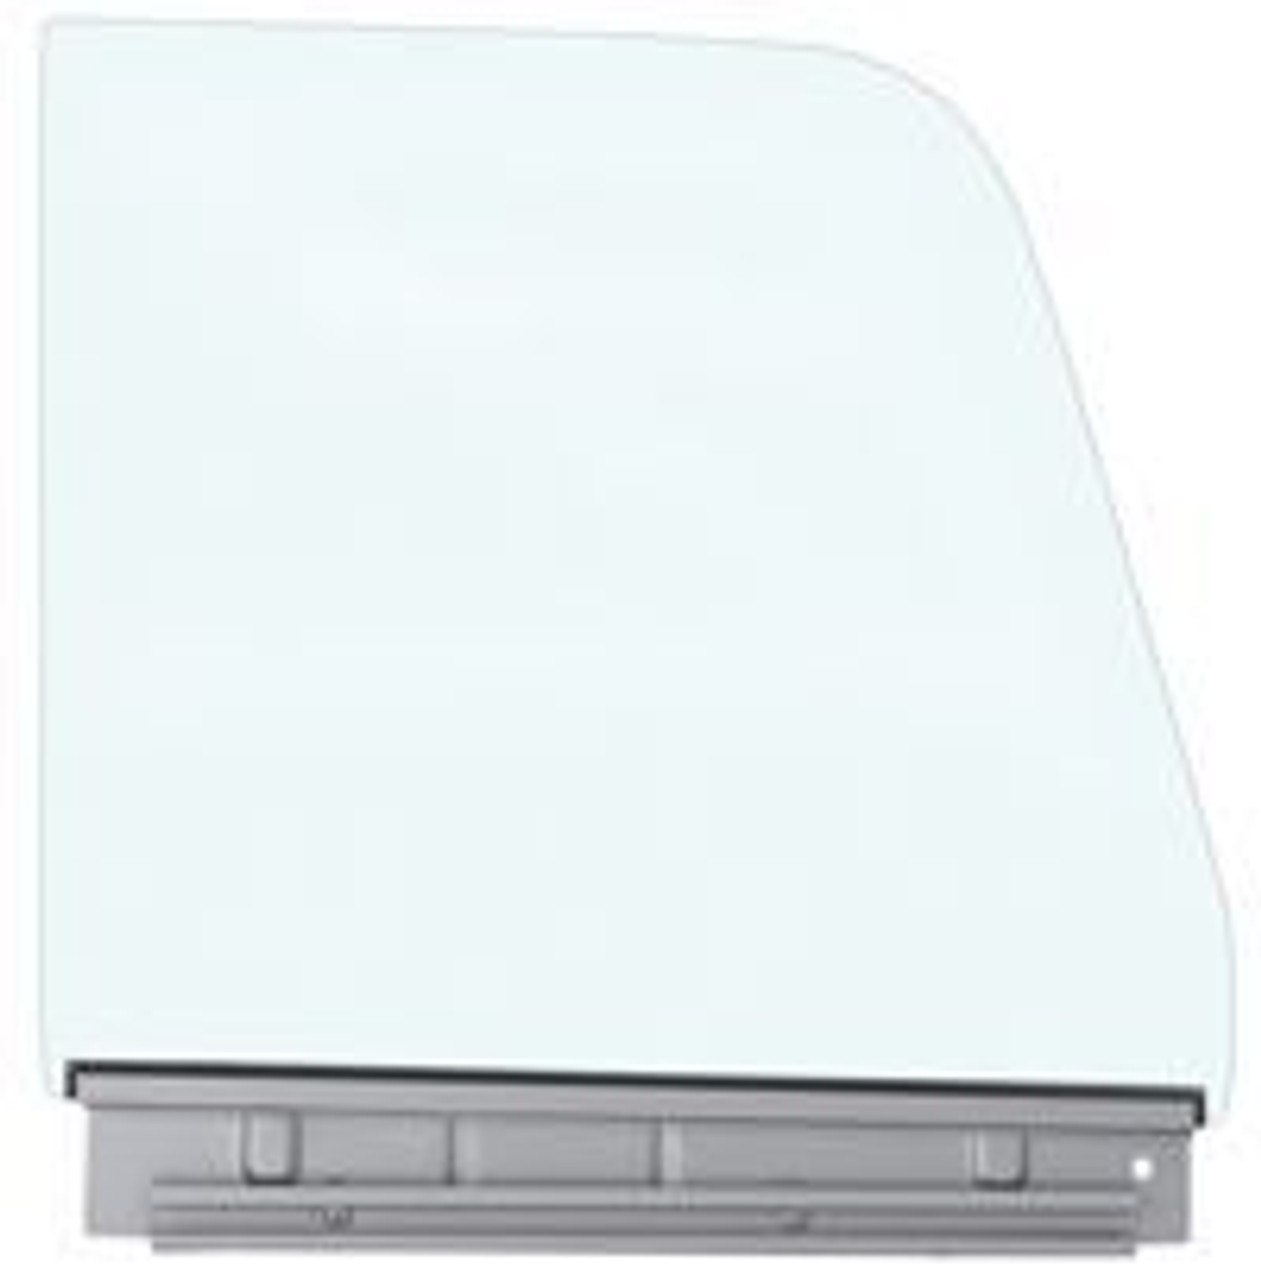 1960-63 Chevy/GMC Truck Door Glass Assy RH, ea. (bottom channel w/clear glass). PLEASE CALL STORE FOR SHIPPING QUOTE.